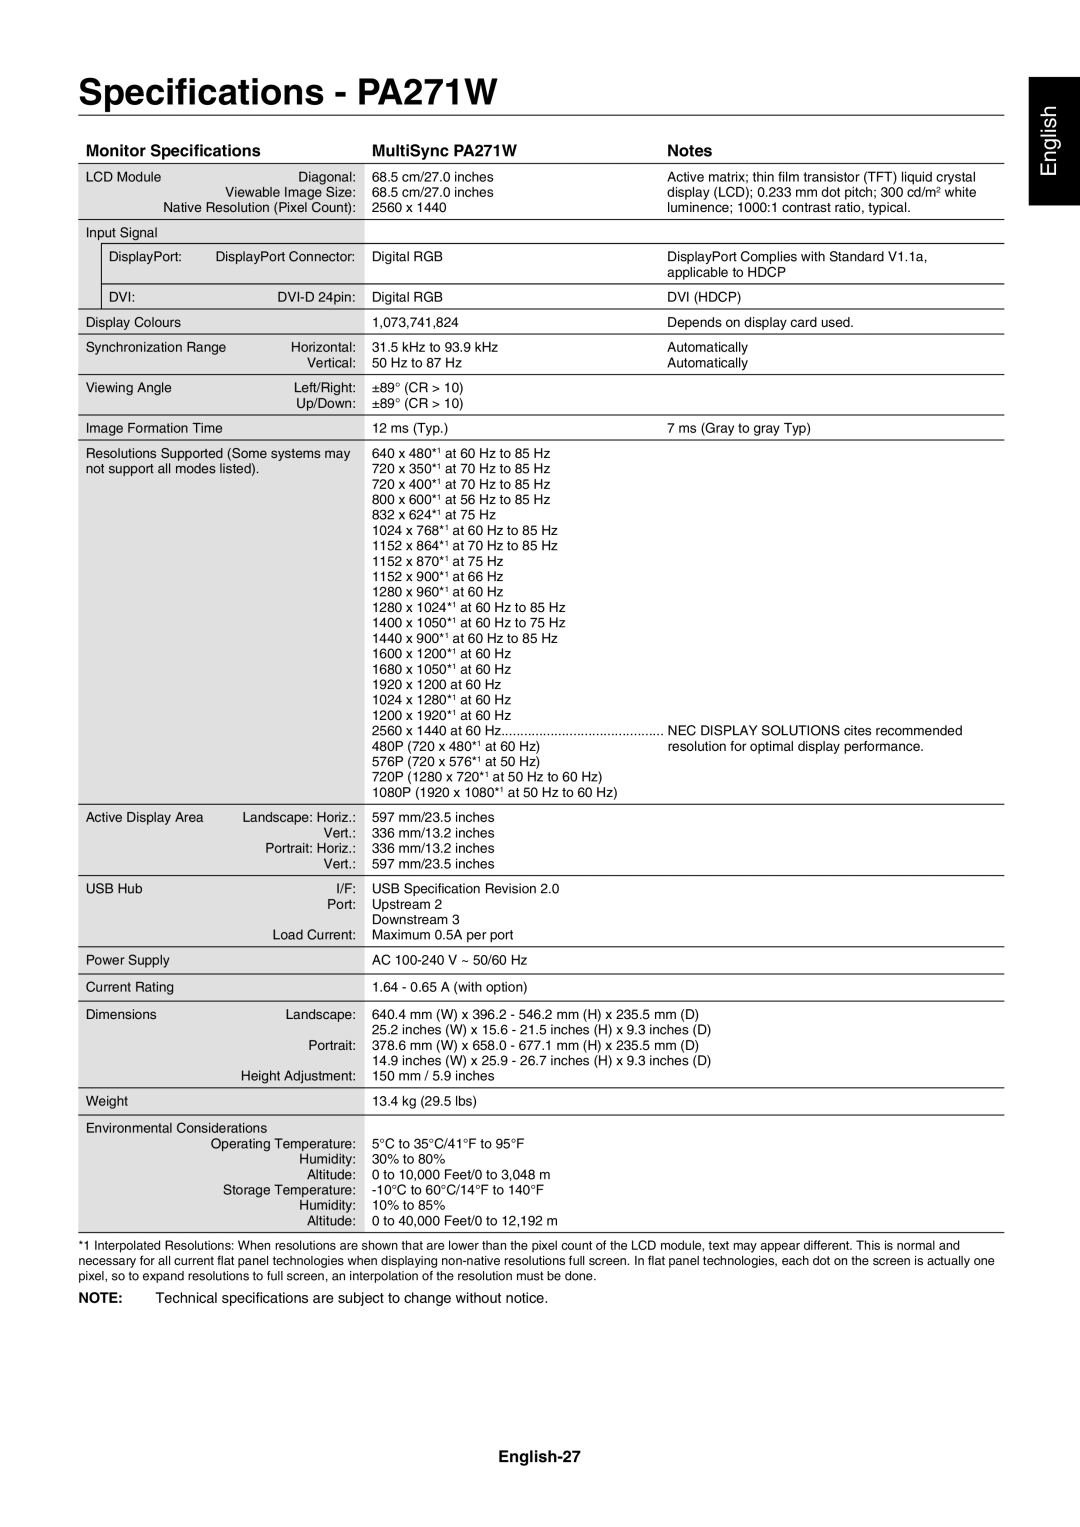 NEC user manual Speciﬁcations - PA271W, English 